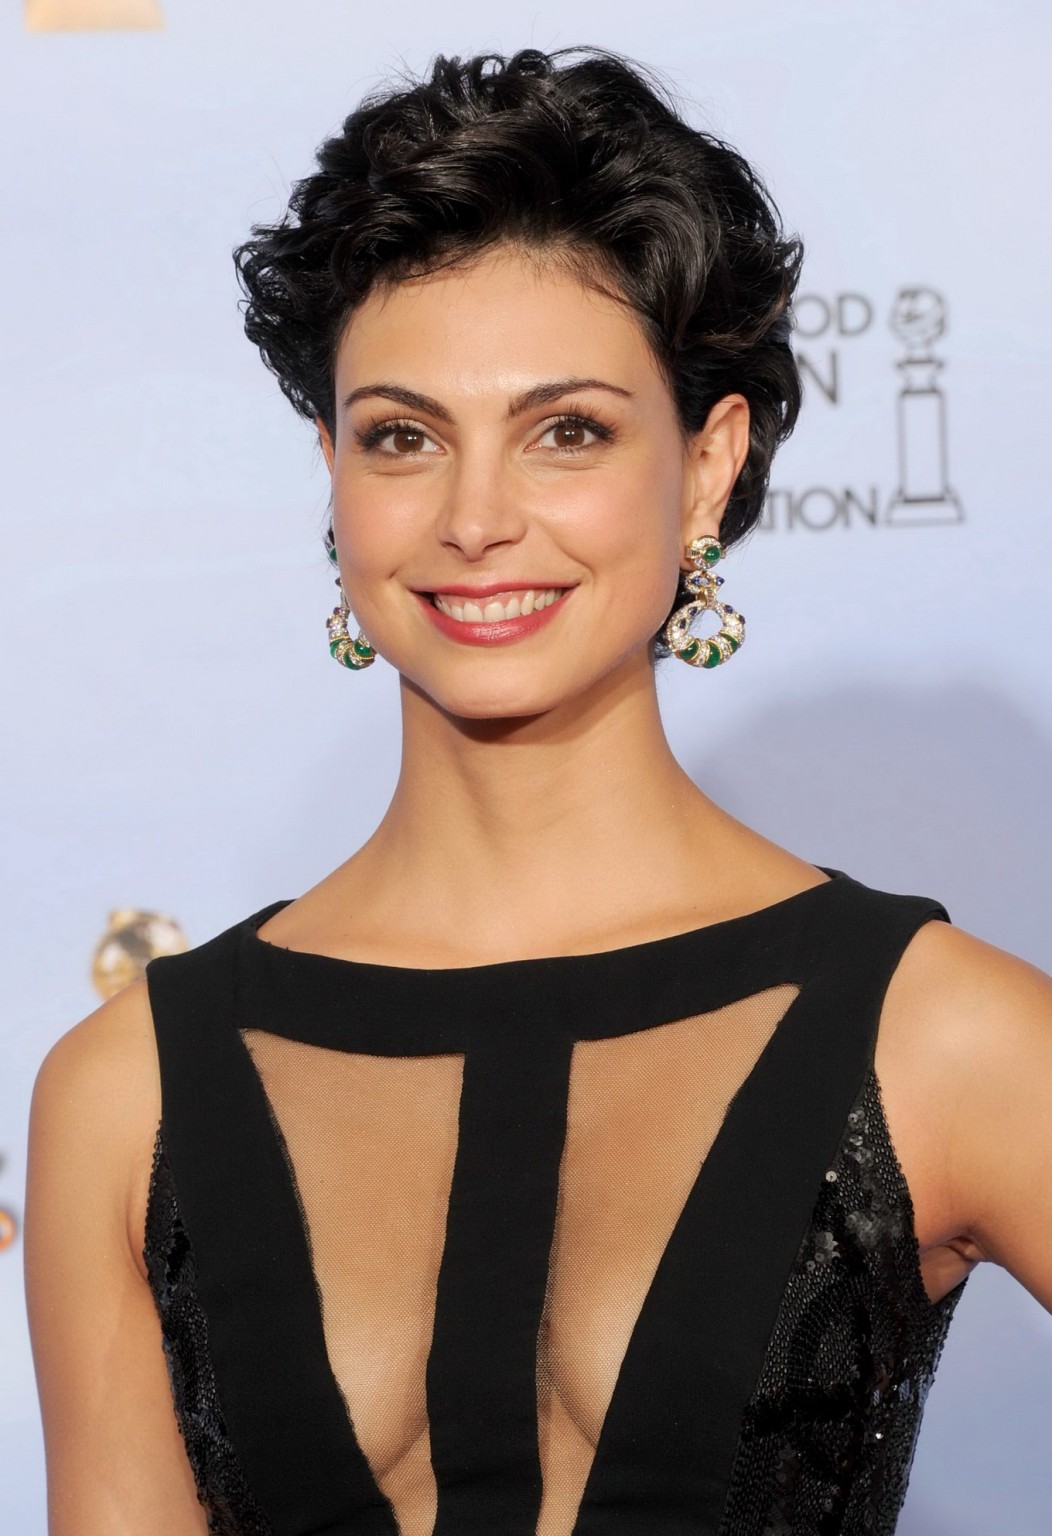 Morena Baccarin braless wearing sexy black dress at the Golden Globes 2012 #75276454